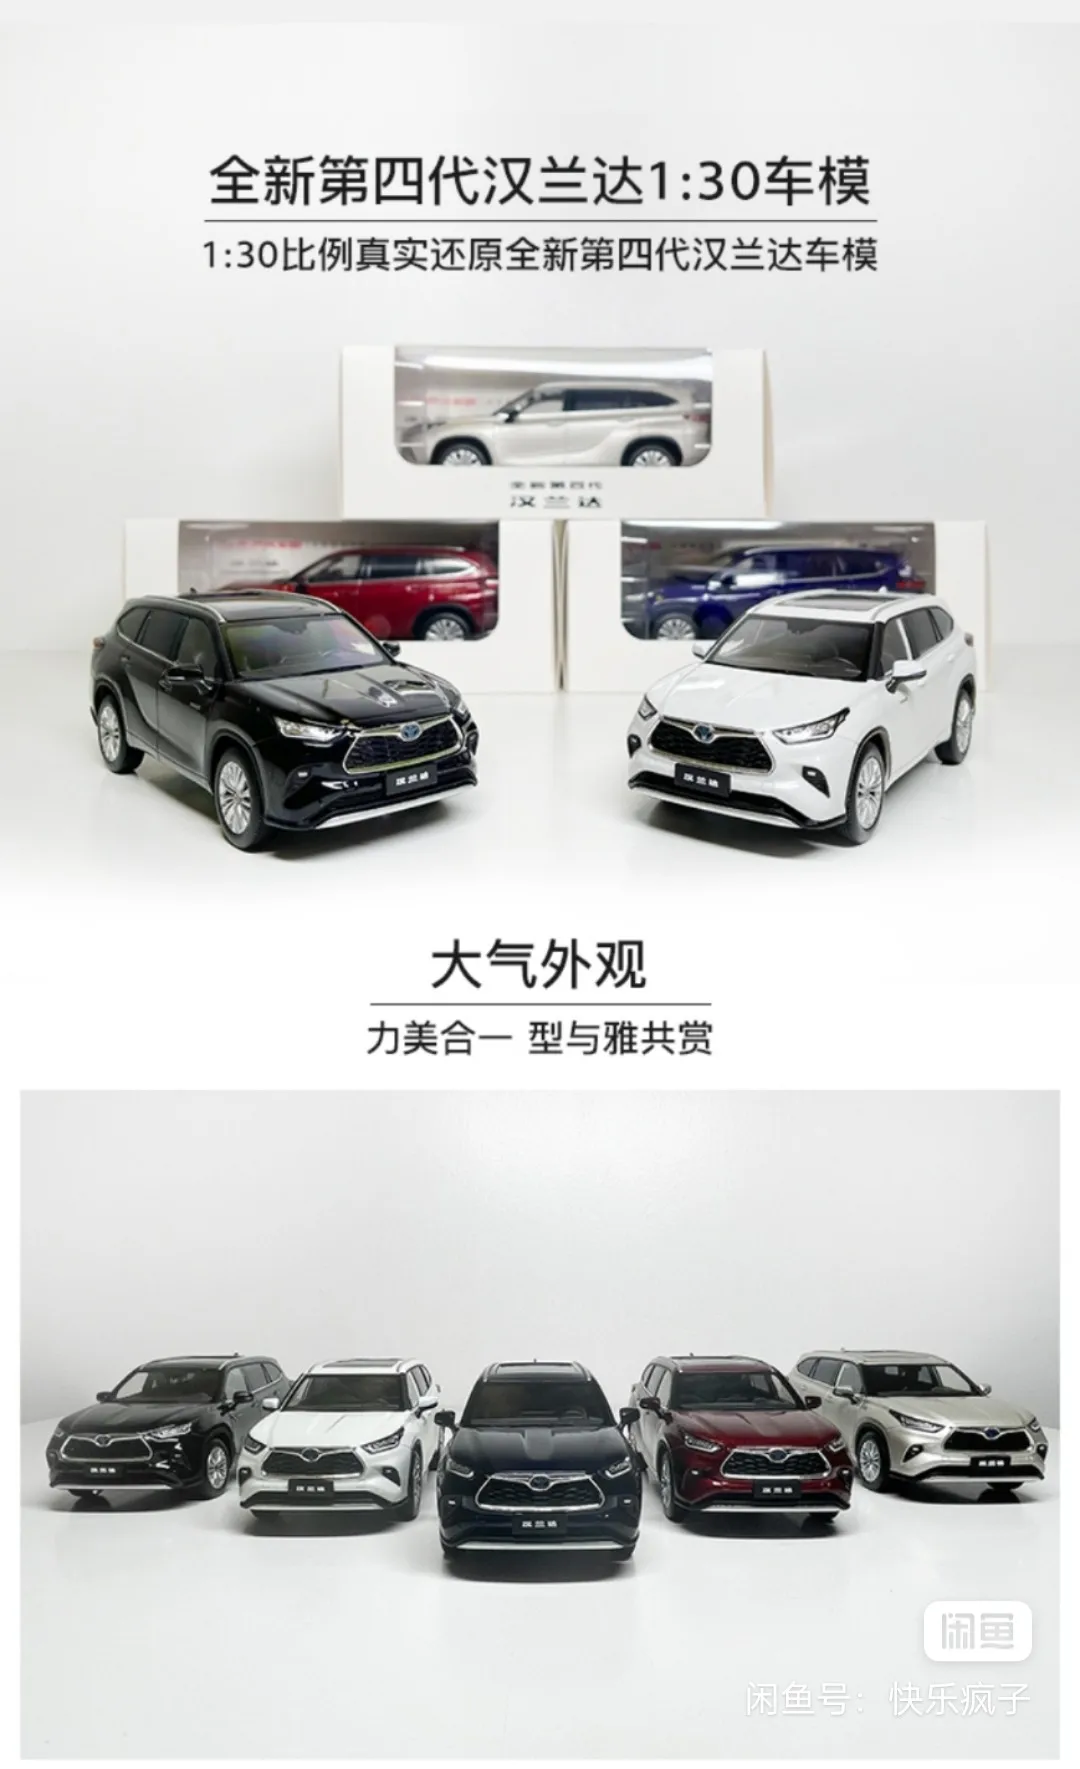 

1:30 Diecast Model for Toyota Highlander 2022 SUV (witt lights) Alloy Toy Car Miniature Collection Gifts